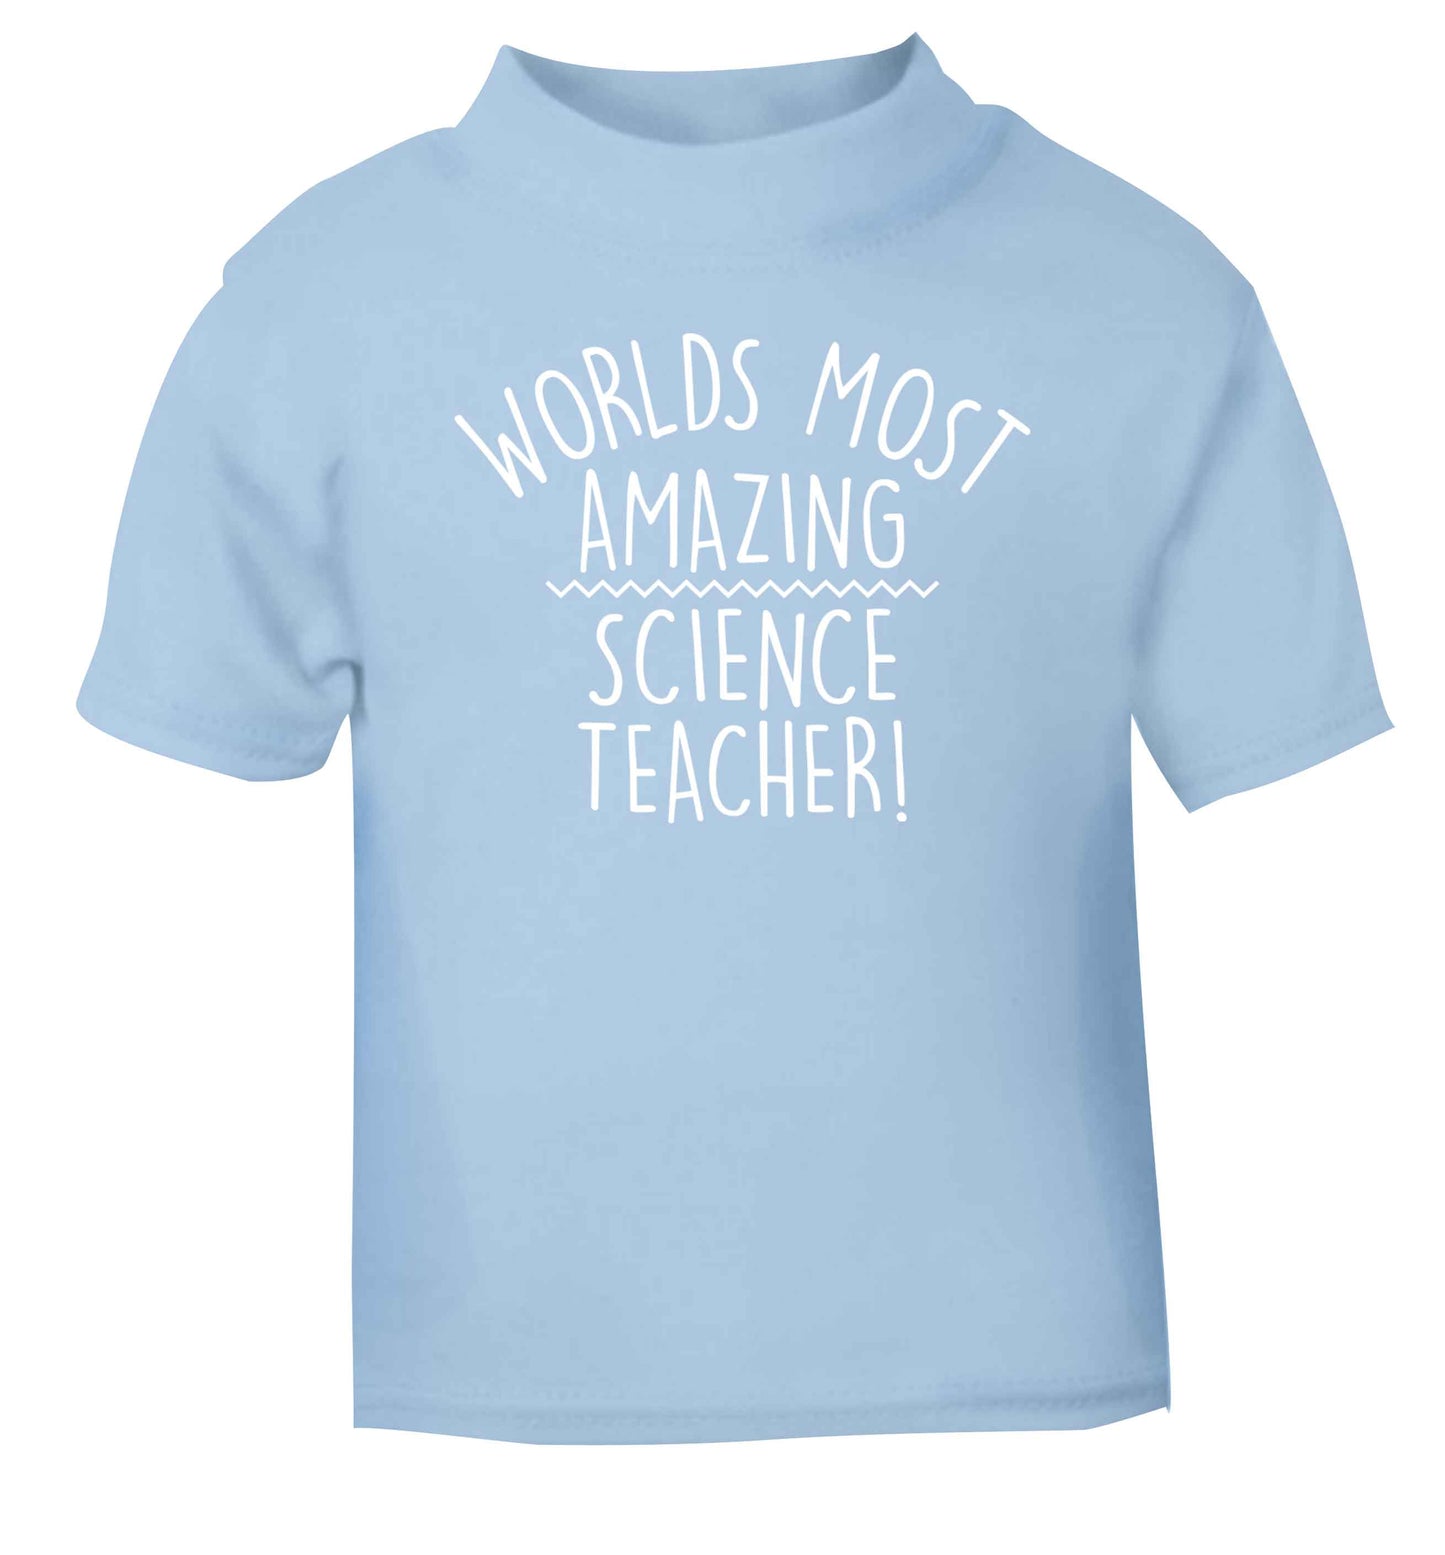 Worlds most amazing science teacher light blue baby toddler Tshirt 2 Years